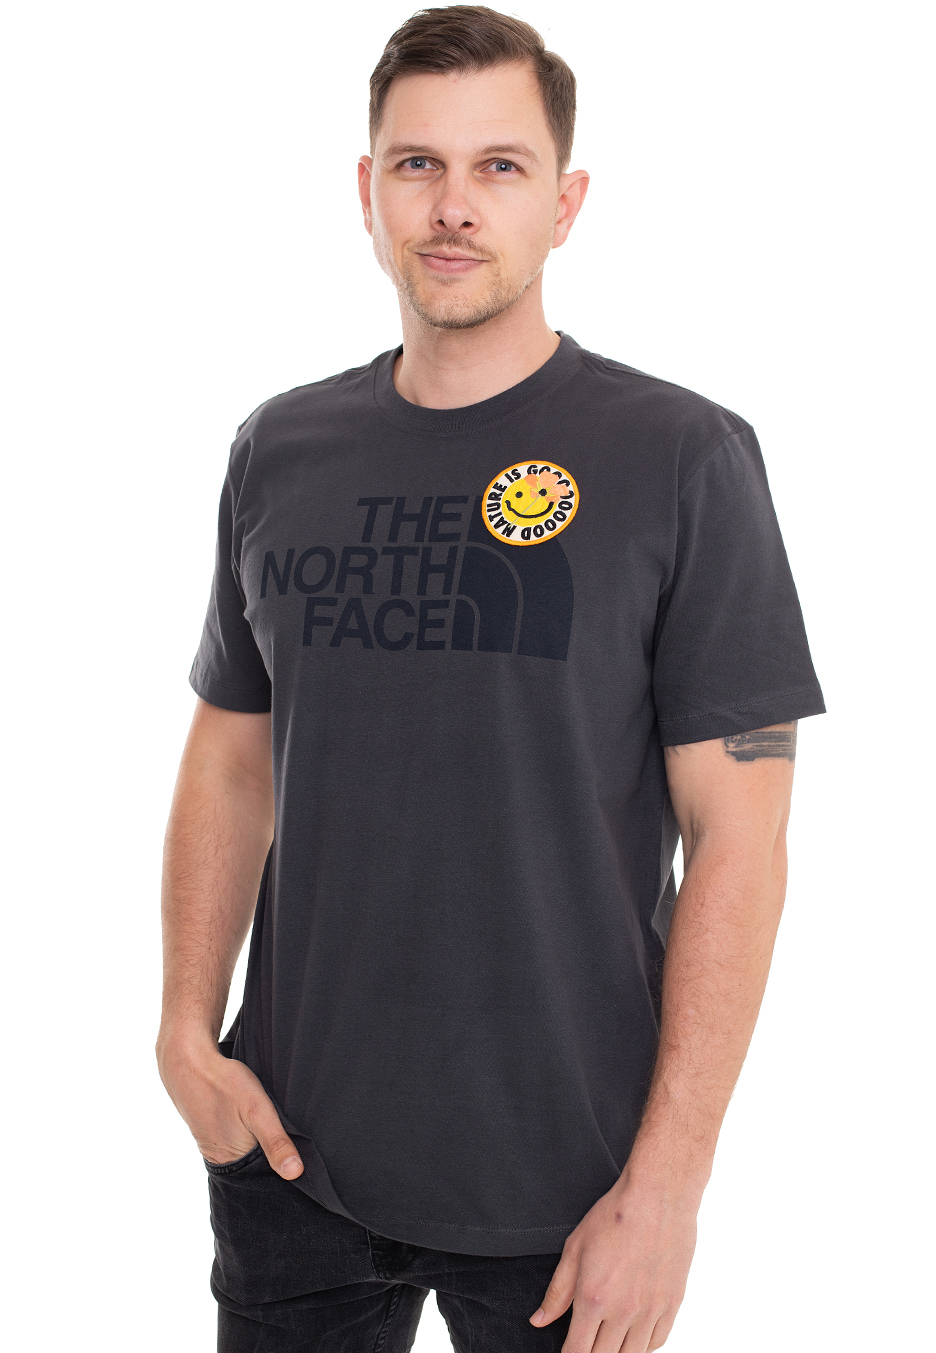 The North Face - Patches Asphalt Grey - - T-Shirts